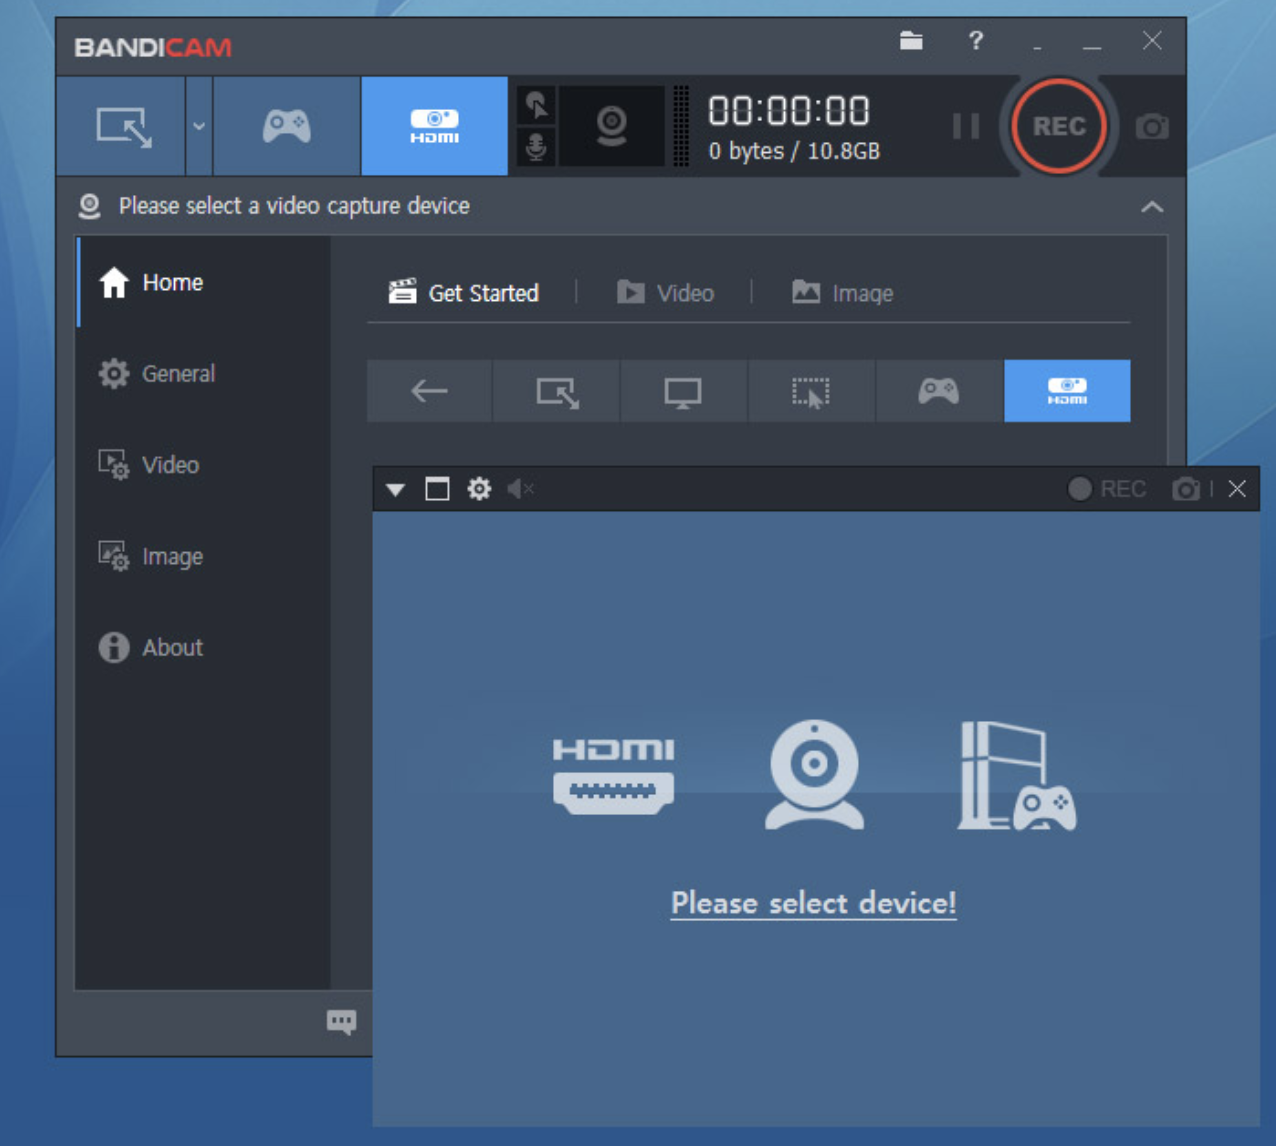 bandicam screen recorder without watermark